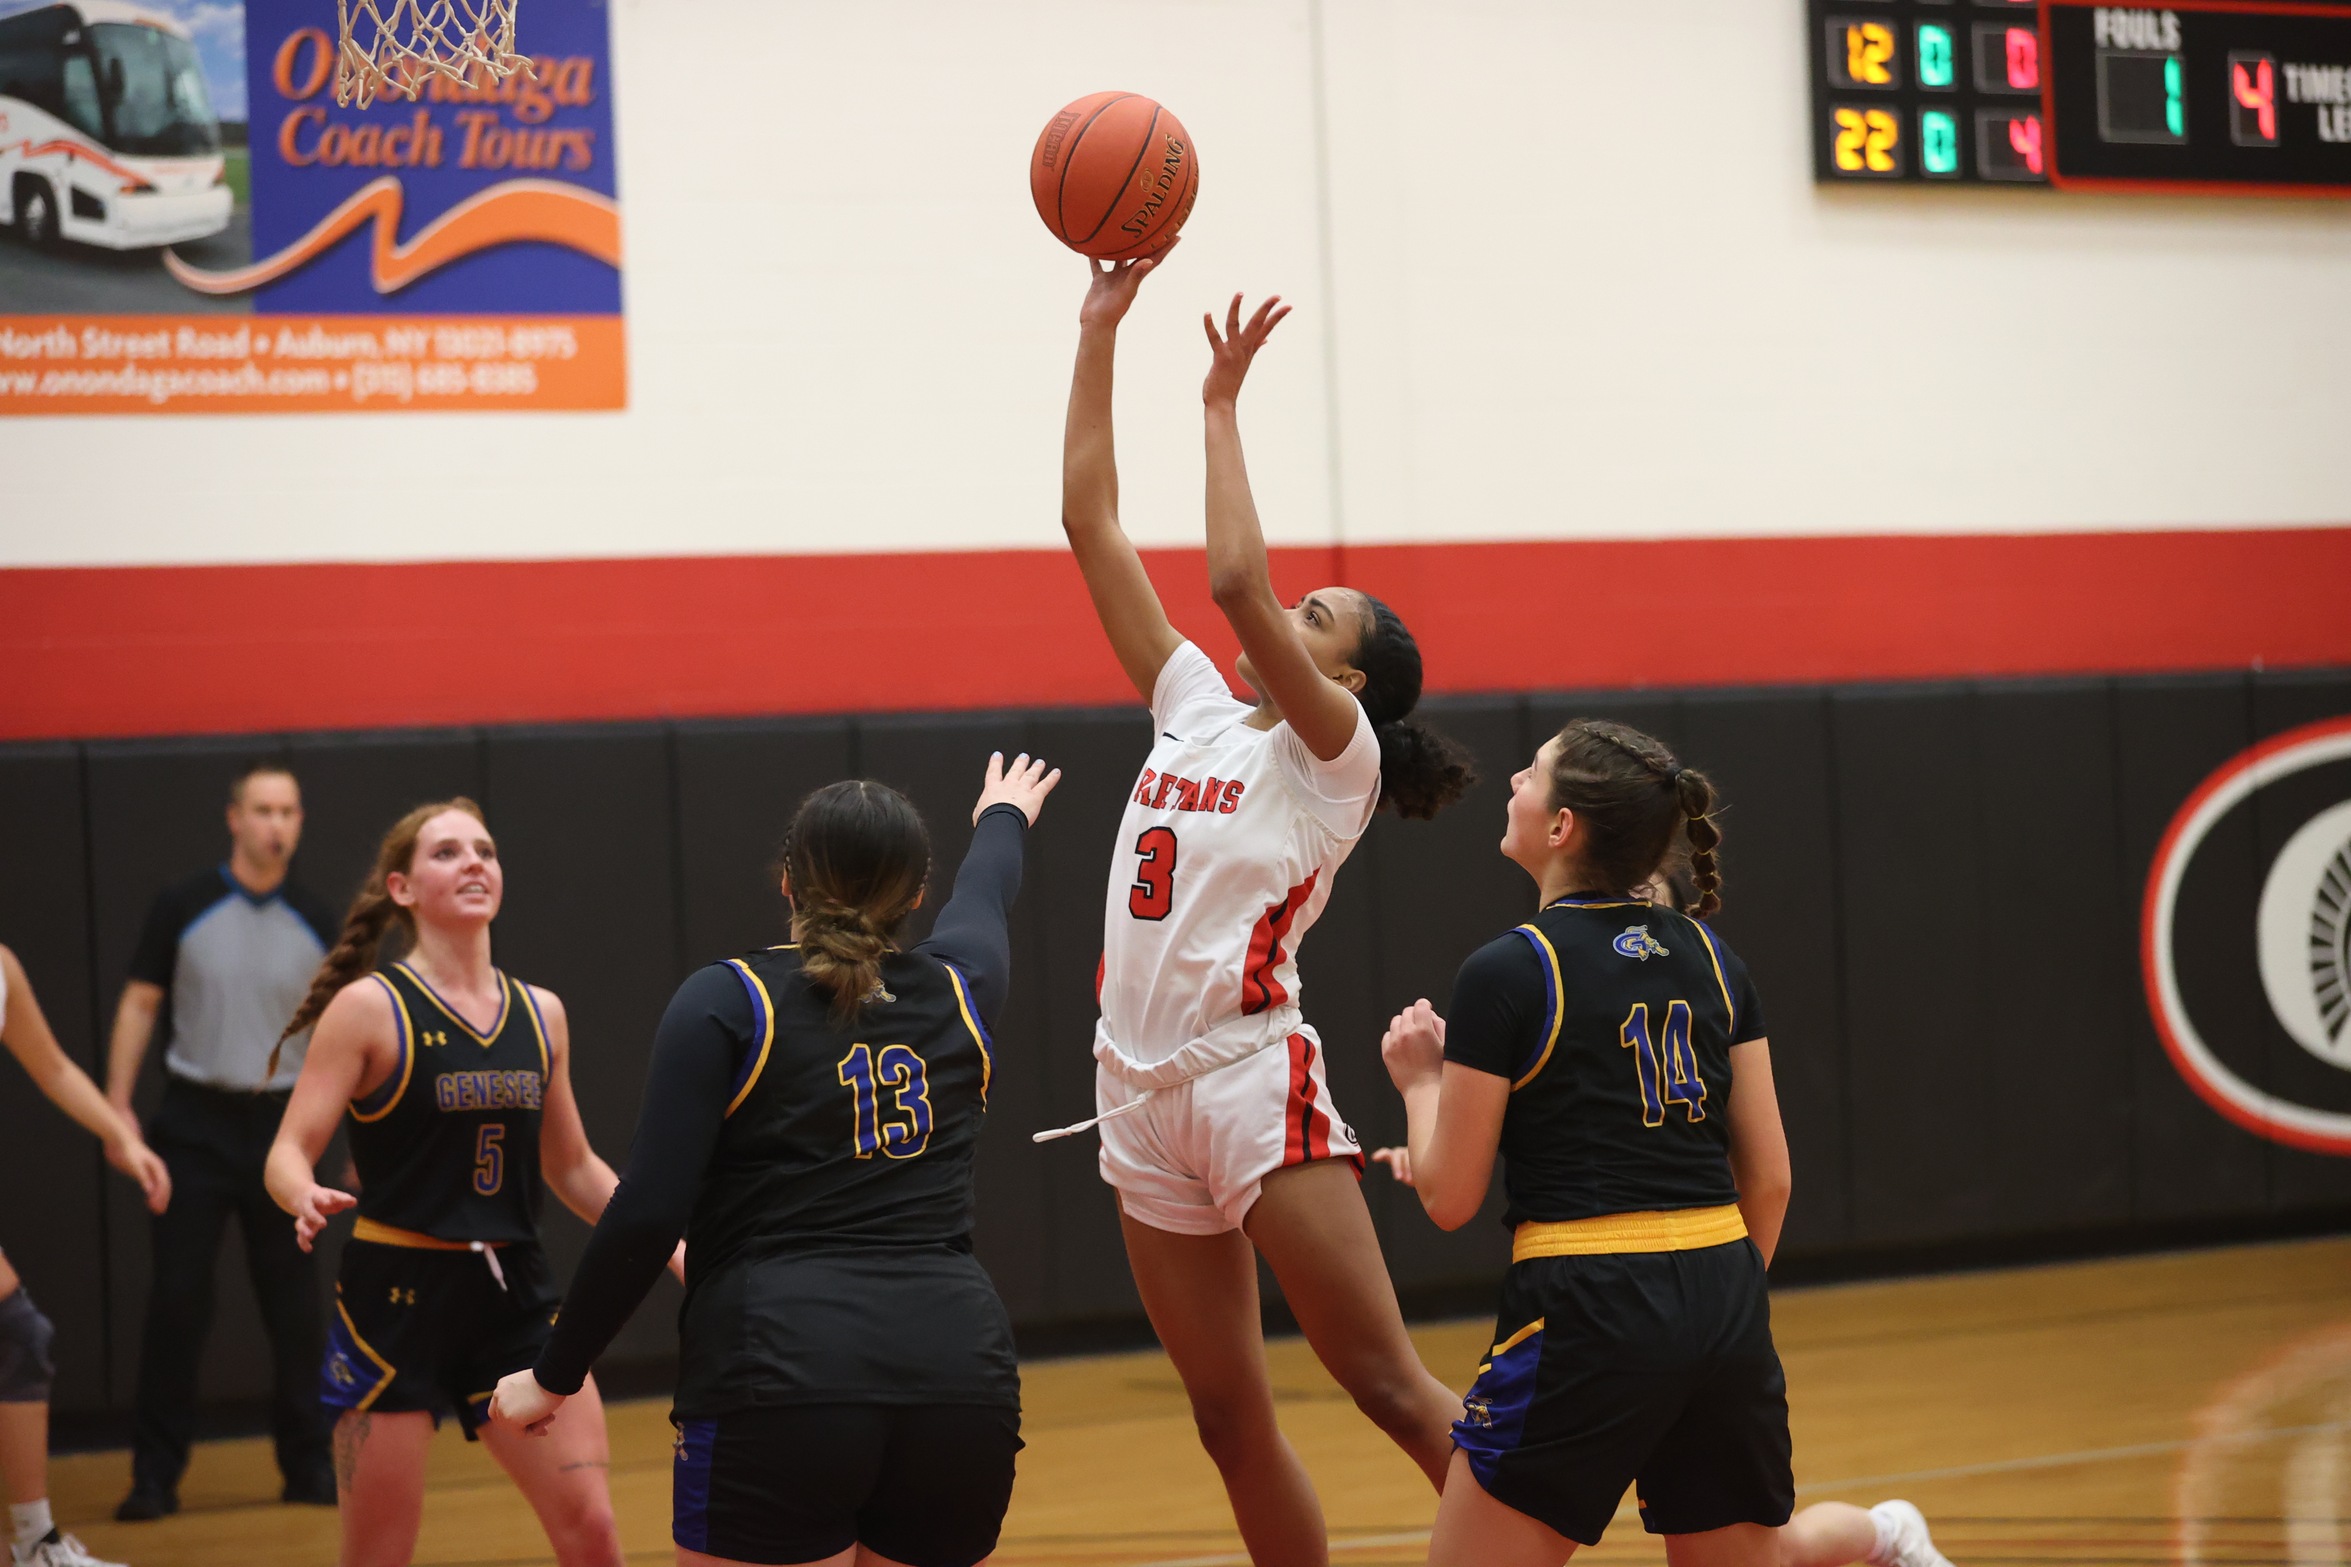 Lamontiona Johnson had 19 points in a home loss to Hudson Valley CC on Saturday.